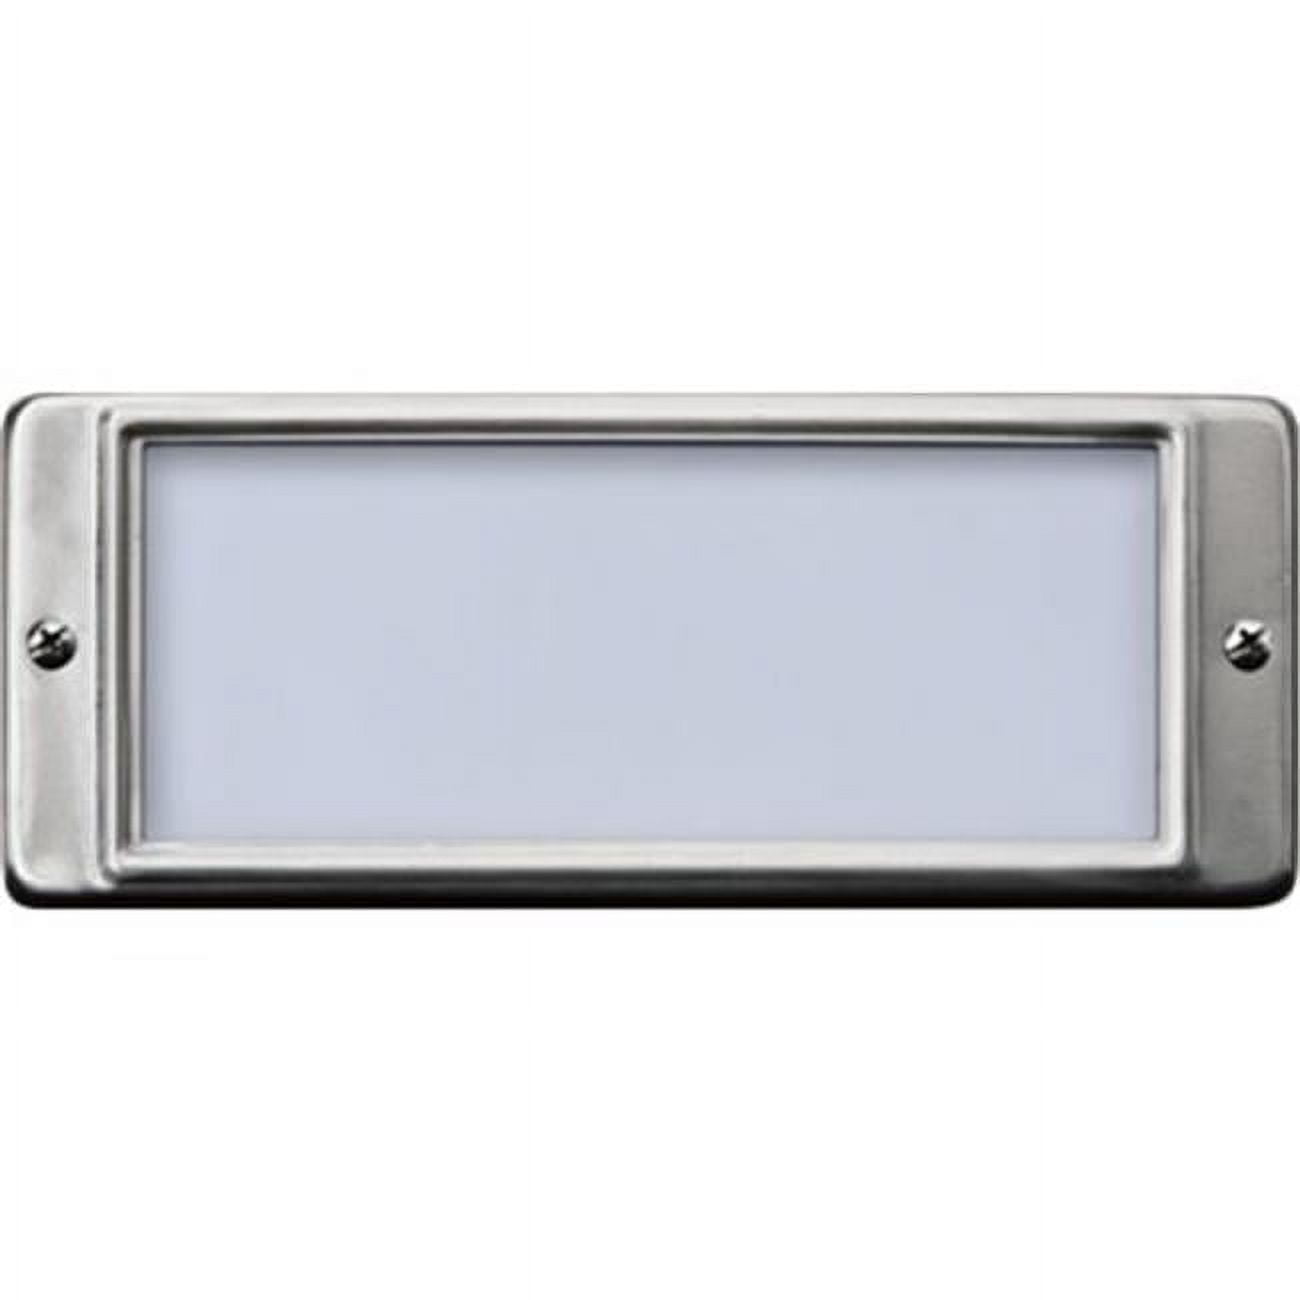 Recessed Open Face Brick, Step & Wall Fixture, 304 Stainless Steel